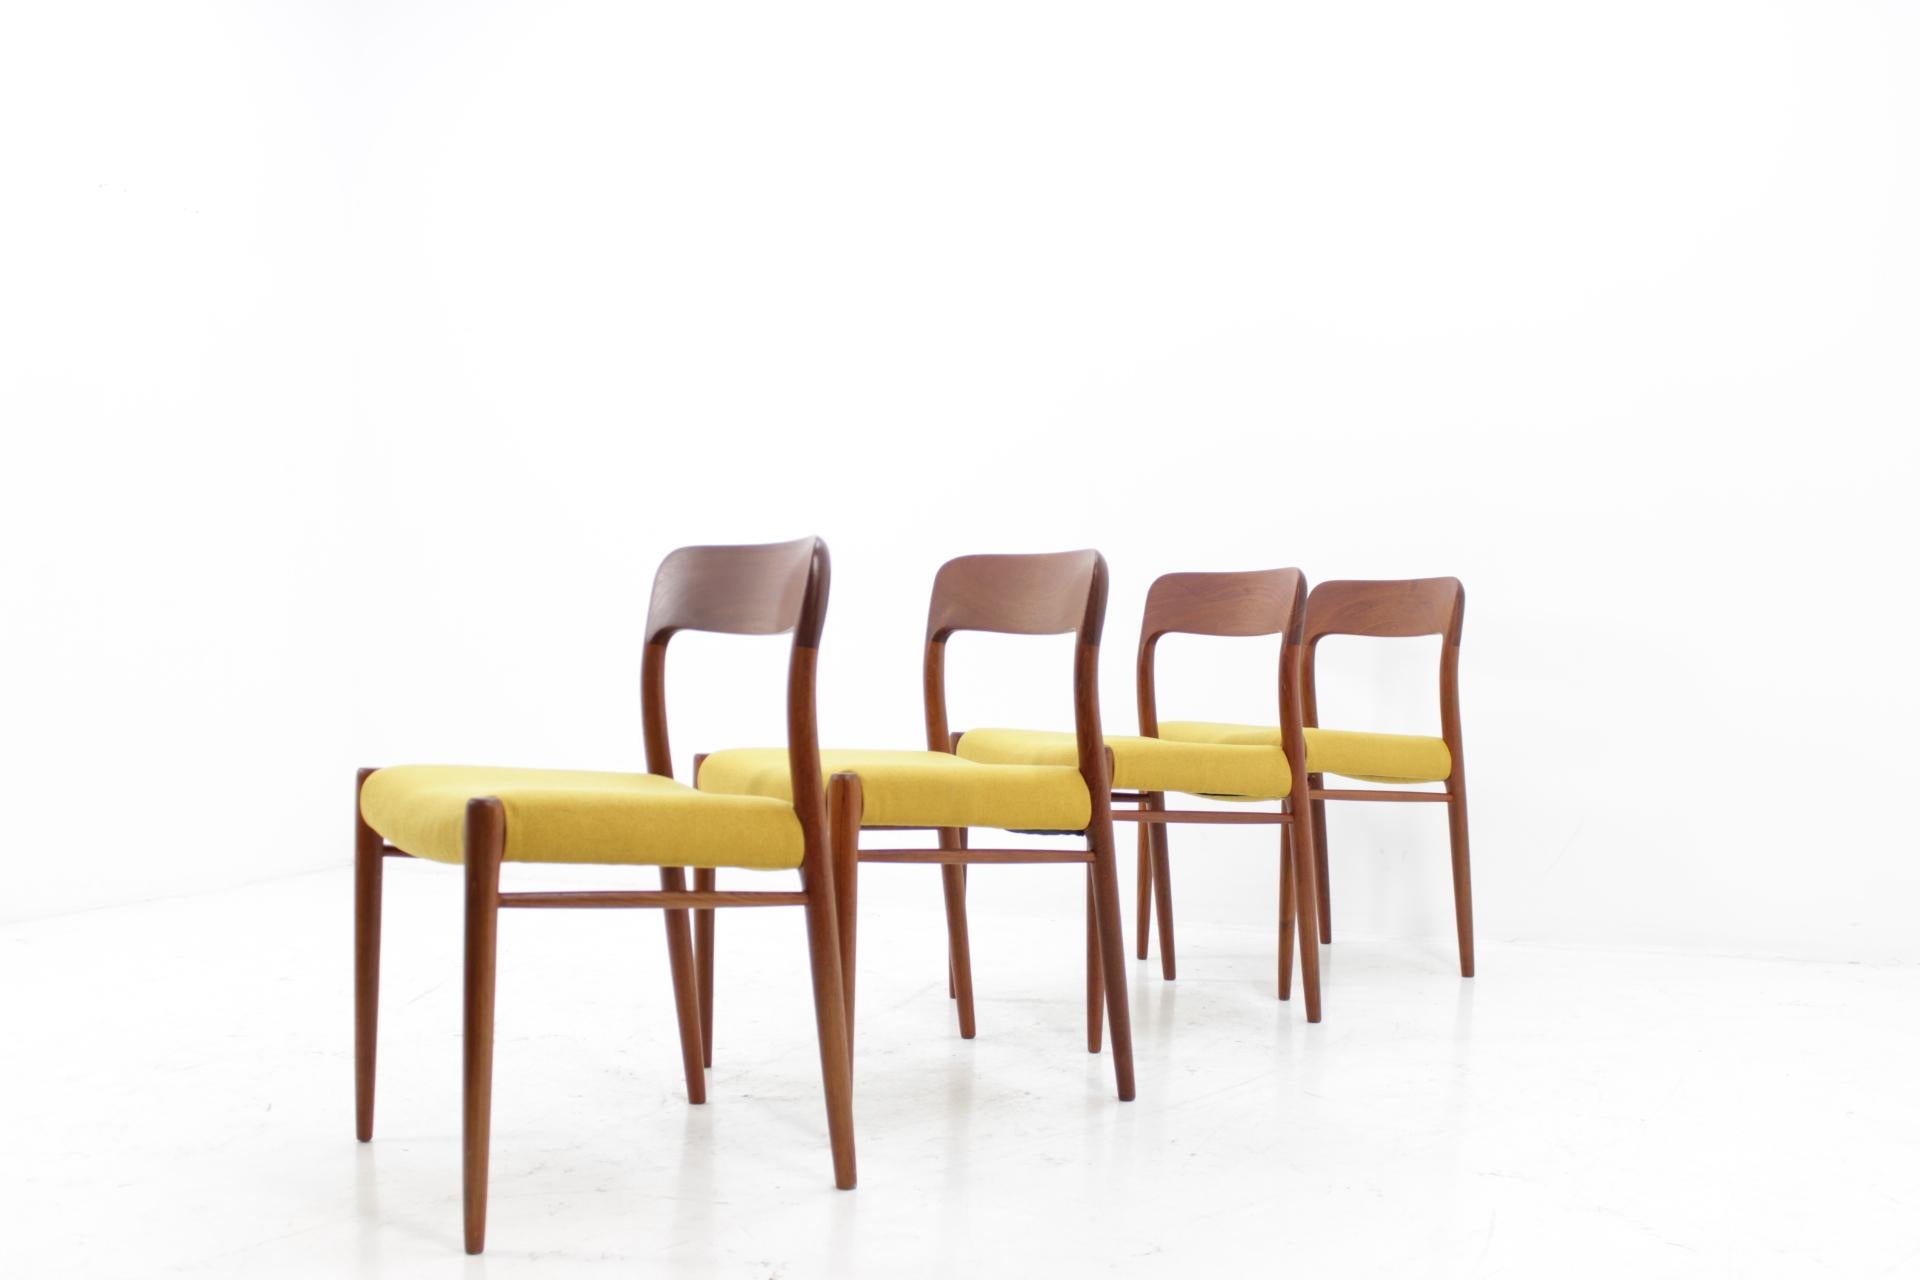 The frame of each one is made from solid teak wood. Newly upholstered. Carefully refurbished.